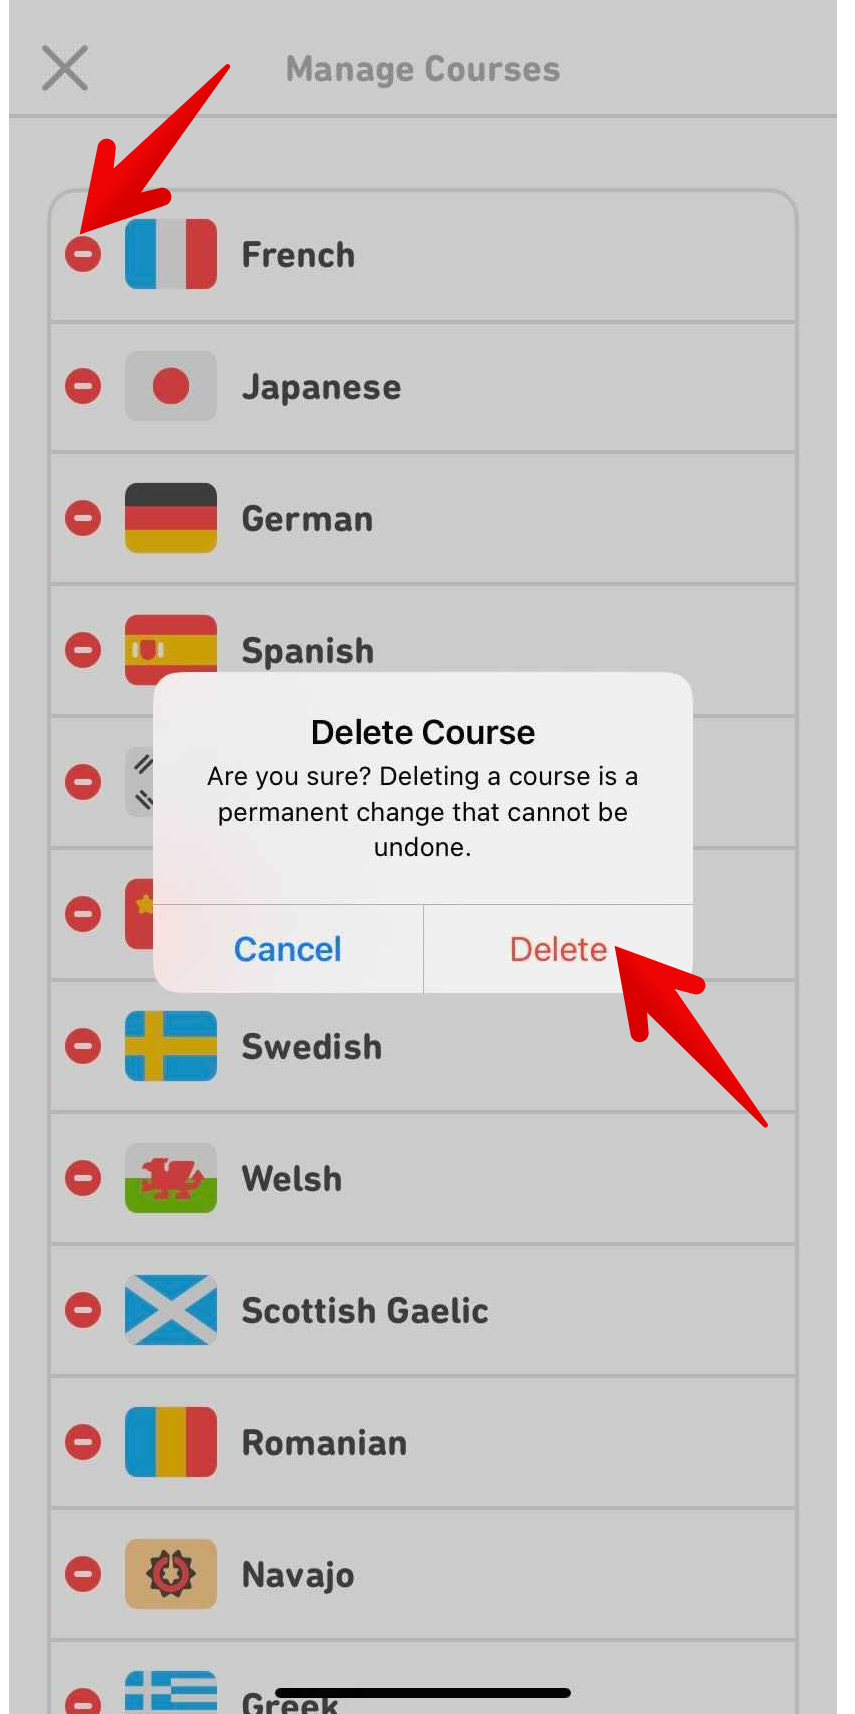 How do I reset or remove a language from my Profile? – Duolingo